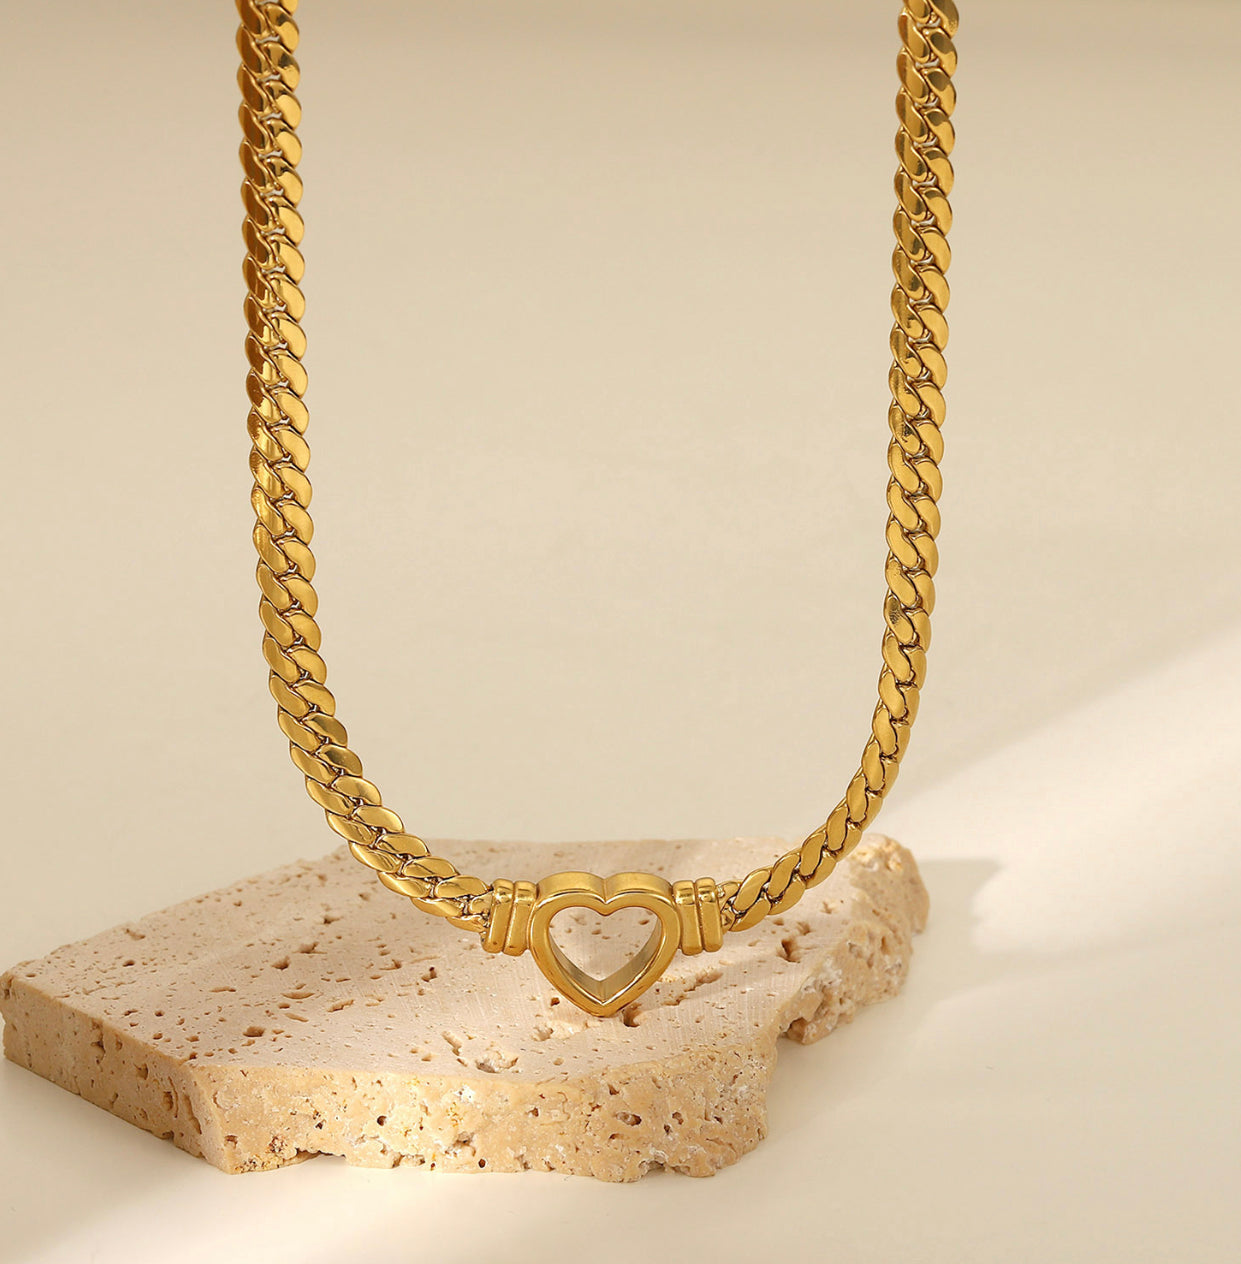 Retro heart Necklace -18k Gold Filled